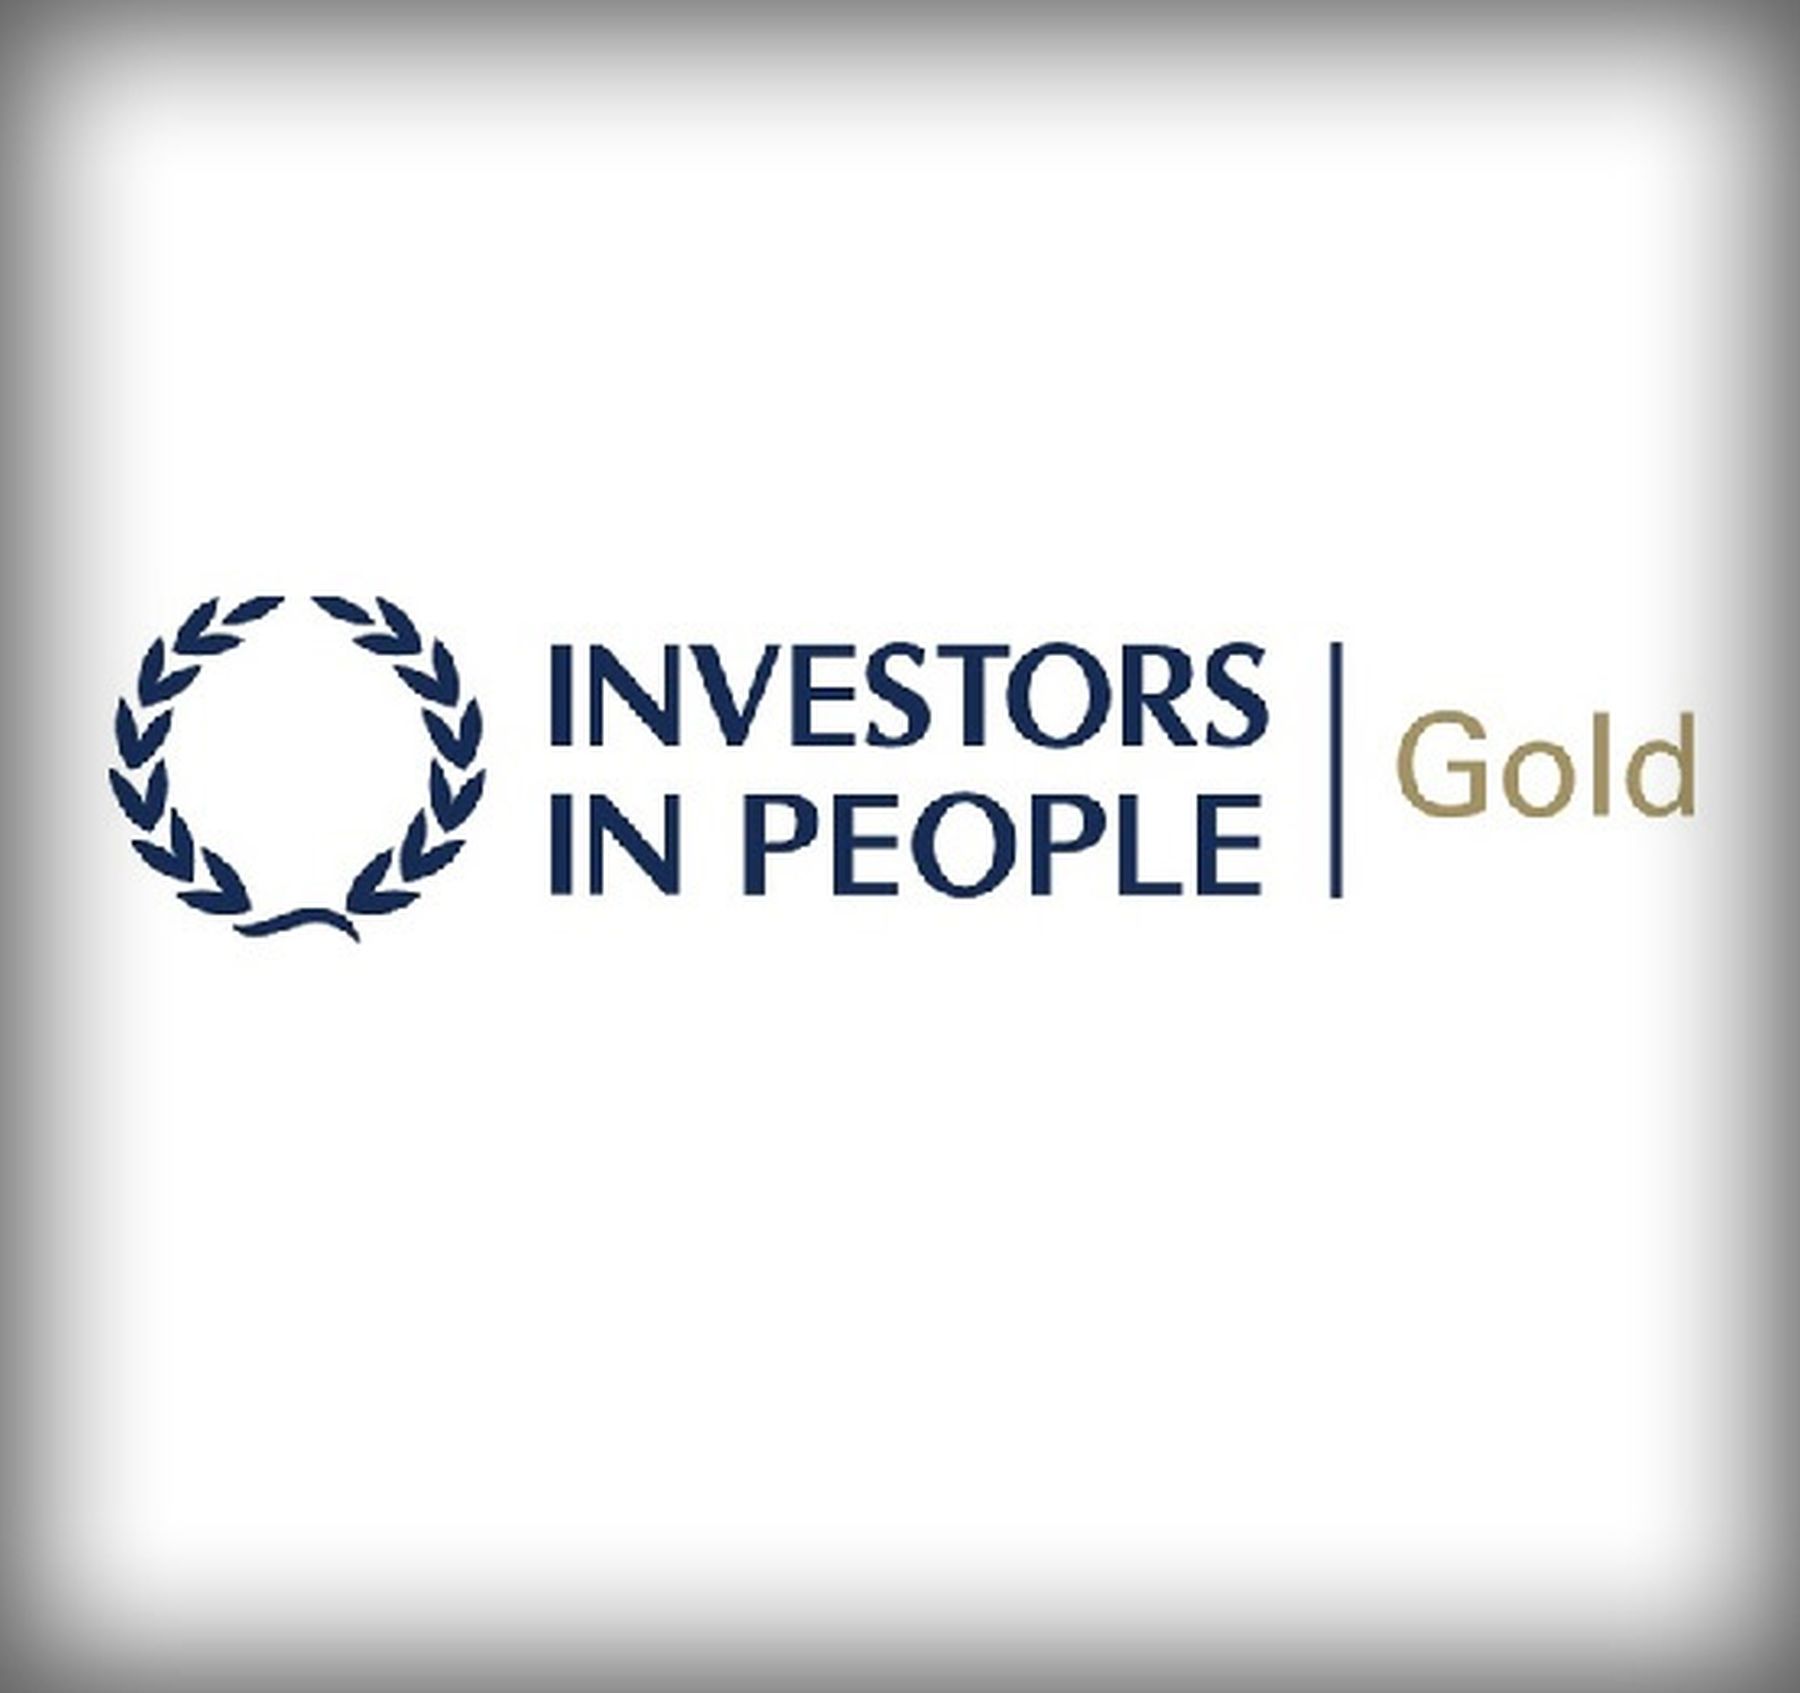 LIPA continues to achieve The Investors in People Gold Standard award